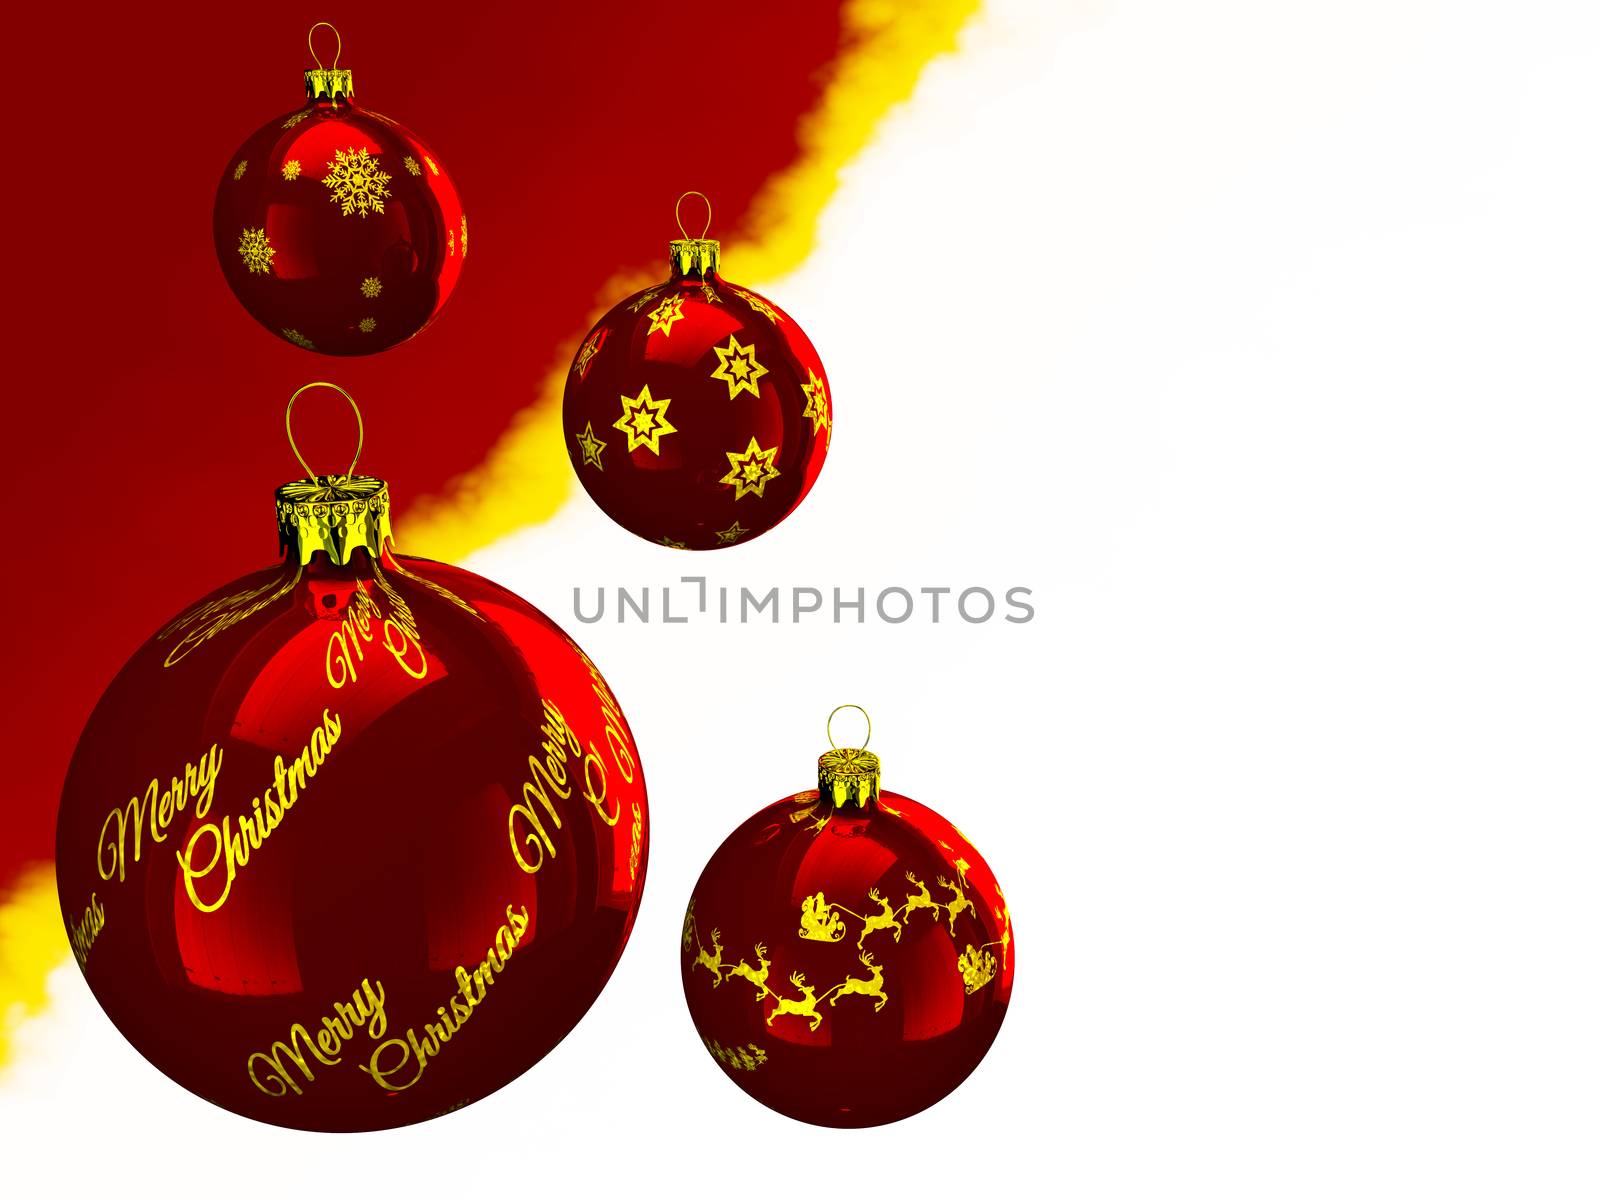 concept of Christmas greeting cards with red balls made ​​in 3d